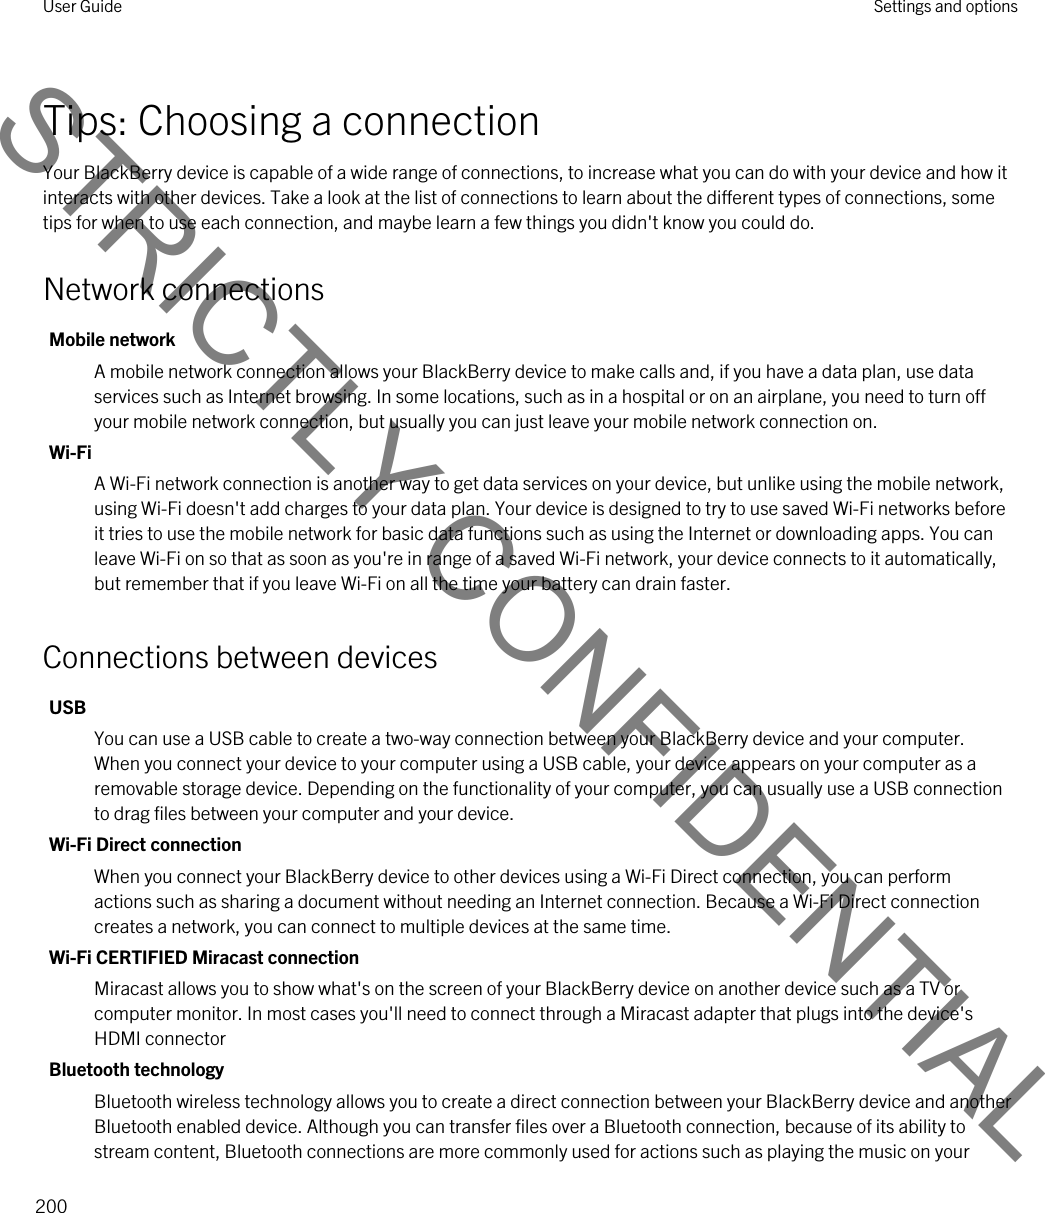 Tips: Choosing a connectionYour BlackBerry device is capable of a wide range of connections, to increase what you can do with your device and how it interacts with other devices. Take a look at the list of connections to learn about the different types of connections, some tips for when to use each connection, and maybe learn a few things you didn&apos;t know you could do.Network connectionsMobile networkA mobile network connection allows your BlackBerry device to make calls and, if you have a data plan, use data services such as Internet browsing. In some locations, such as in a hospital or on an airplane, you need to turn off your mobile network connection, but usually you can just leave your mobile network connection on.Wi-FiA Wi-Fi network connection is another way to get data services on your device, but unlike using the mobile network, using Wi-Fi doesn&apos;t add charges to your data plan. Your device is designed to try to use saved Wi-Fi networks before it tries to use the mobile network for basic data functions such as using the Internet or downloading apps. You can leave Wi-Fi on so that as soon as you&apos;re in range of a saved Wi-Fi network, your device connects to it automatically, but remember that if you leave Wi-Fi on all the time your battery can drain faster.Connections between devicesUSBYou can use a USB cable to create a two-way connection between your BlackBerry device and your computer. When you connect your device to your computer using a USB cable, your device appears on your computer as a removable storage device. Depending on the functionality of your computer, you can usually use a USB connection to drag files between your computer and your device.Wi-Fi Direct connectionWhen you connect your BlackBerry device to other devices using a Wi-Fi Direct connection, you can perform actions such as sharing a document without needing an Internet connection. Because a Wi-Fi Direct connection creates a network, you can connect to multiple devices at the same time.Wi-Fi CERTIFIED Miracast connectionMiracast allows you to show what&apos;s on the screen of your BlackBerry device on another device such as a TV or computer monitor. In most cases you&apos;ll need to connect through a Miracast adapter that plugs into the device&apos;s HDMI connectorBluetooth technologyBluetooth wireless technology allows you to create a direct connection between your BlackBerry device and another Bluetooth enabled device. Although you can transfer files over a Bluetooth connection, because of its ability to stream content, Bluetooth connections are more commonly used for actions such as playing the music on your User Guide Settings and options200STRICTLY CONFIDENTIAL